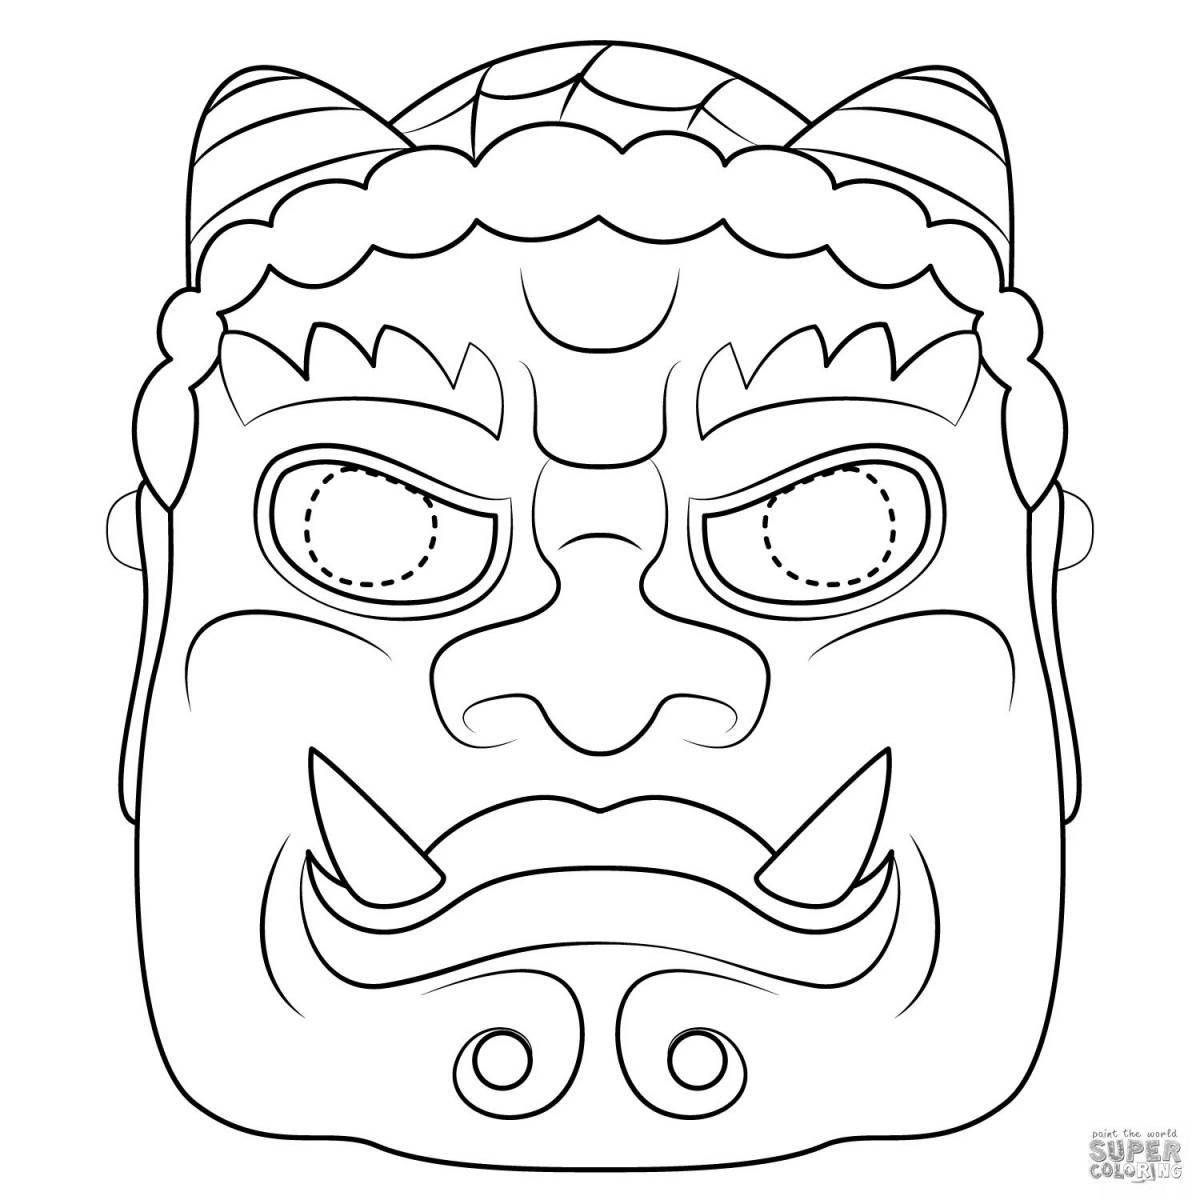 Glowing fabric face mask coloring page